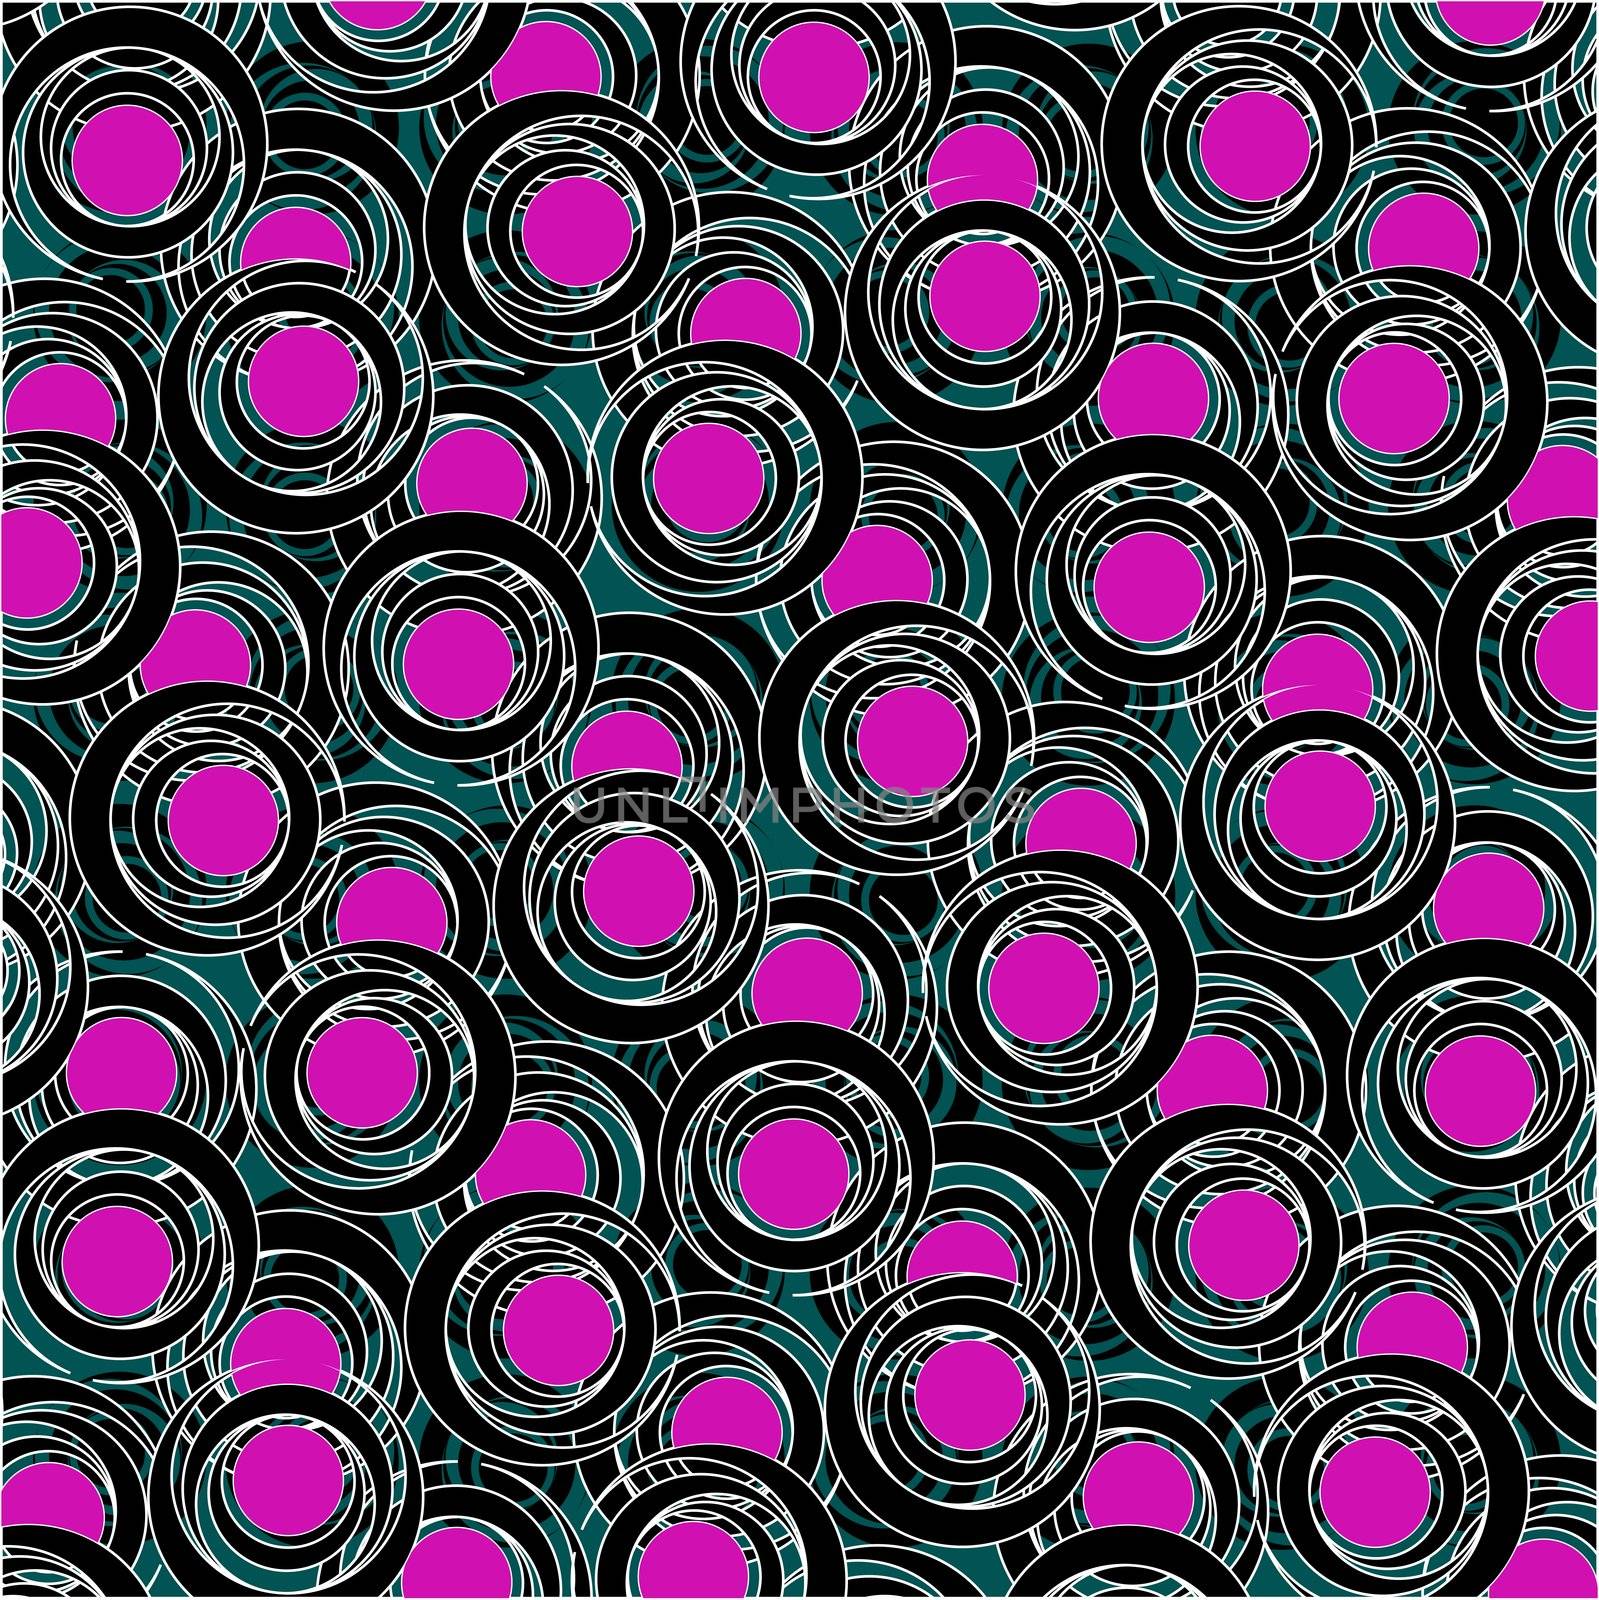 purple and black circle pattern, vector art illustration; more drawings and patterns in my gallery